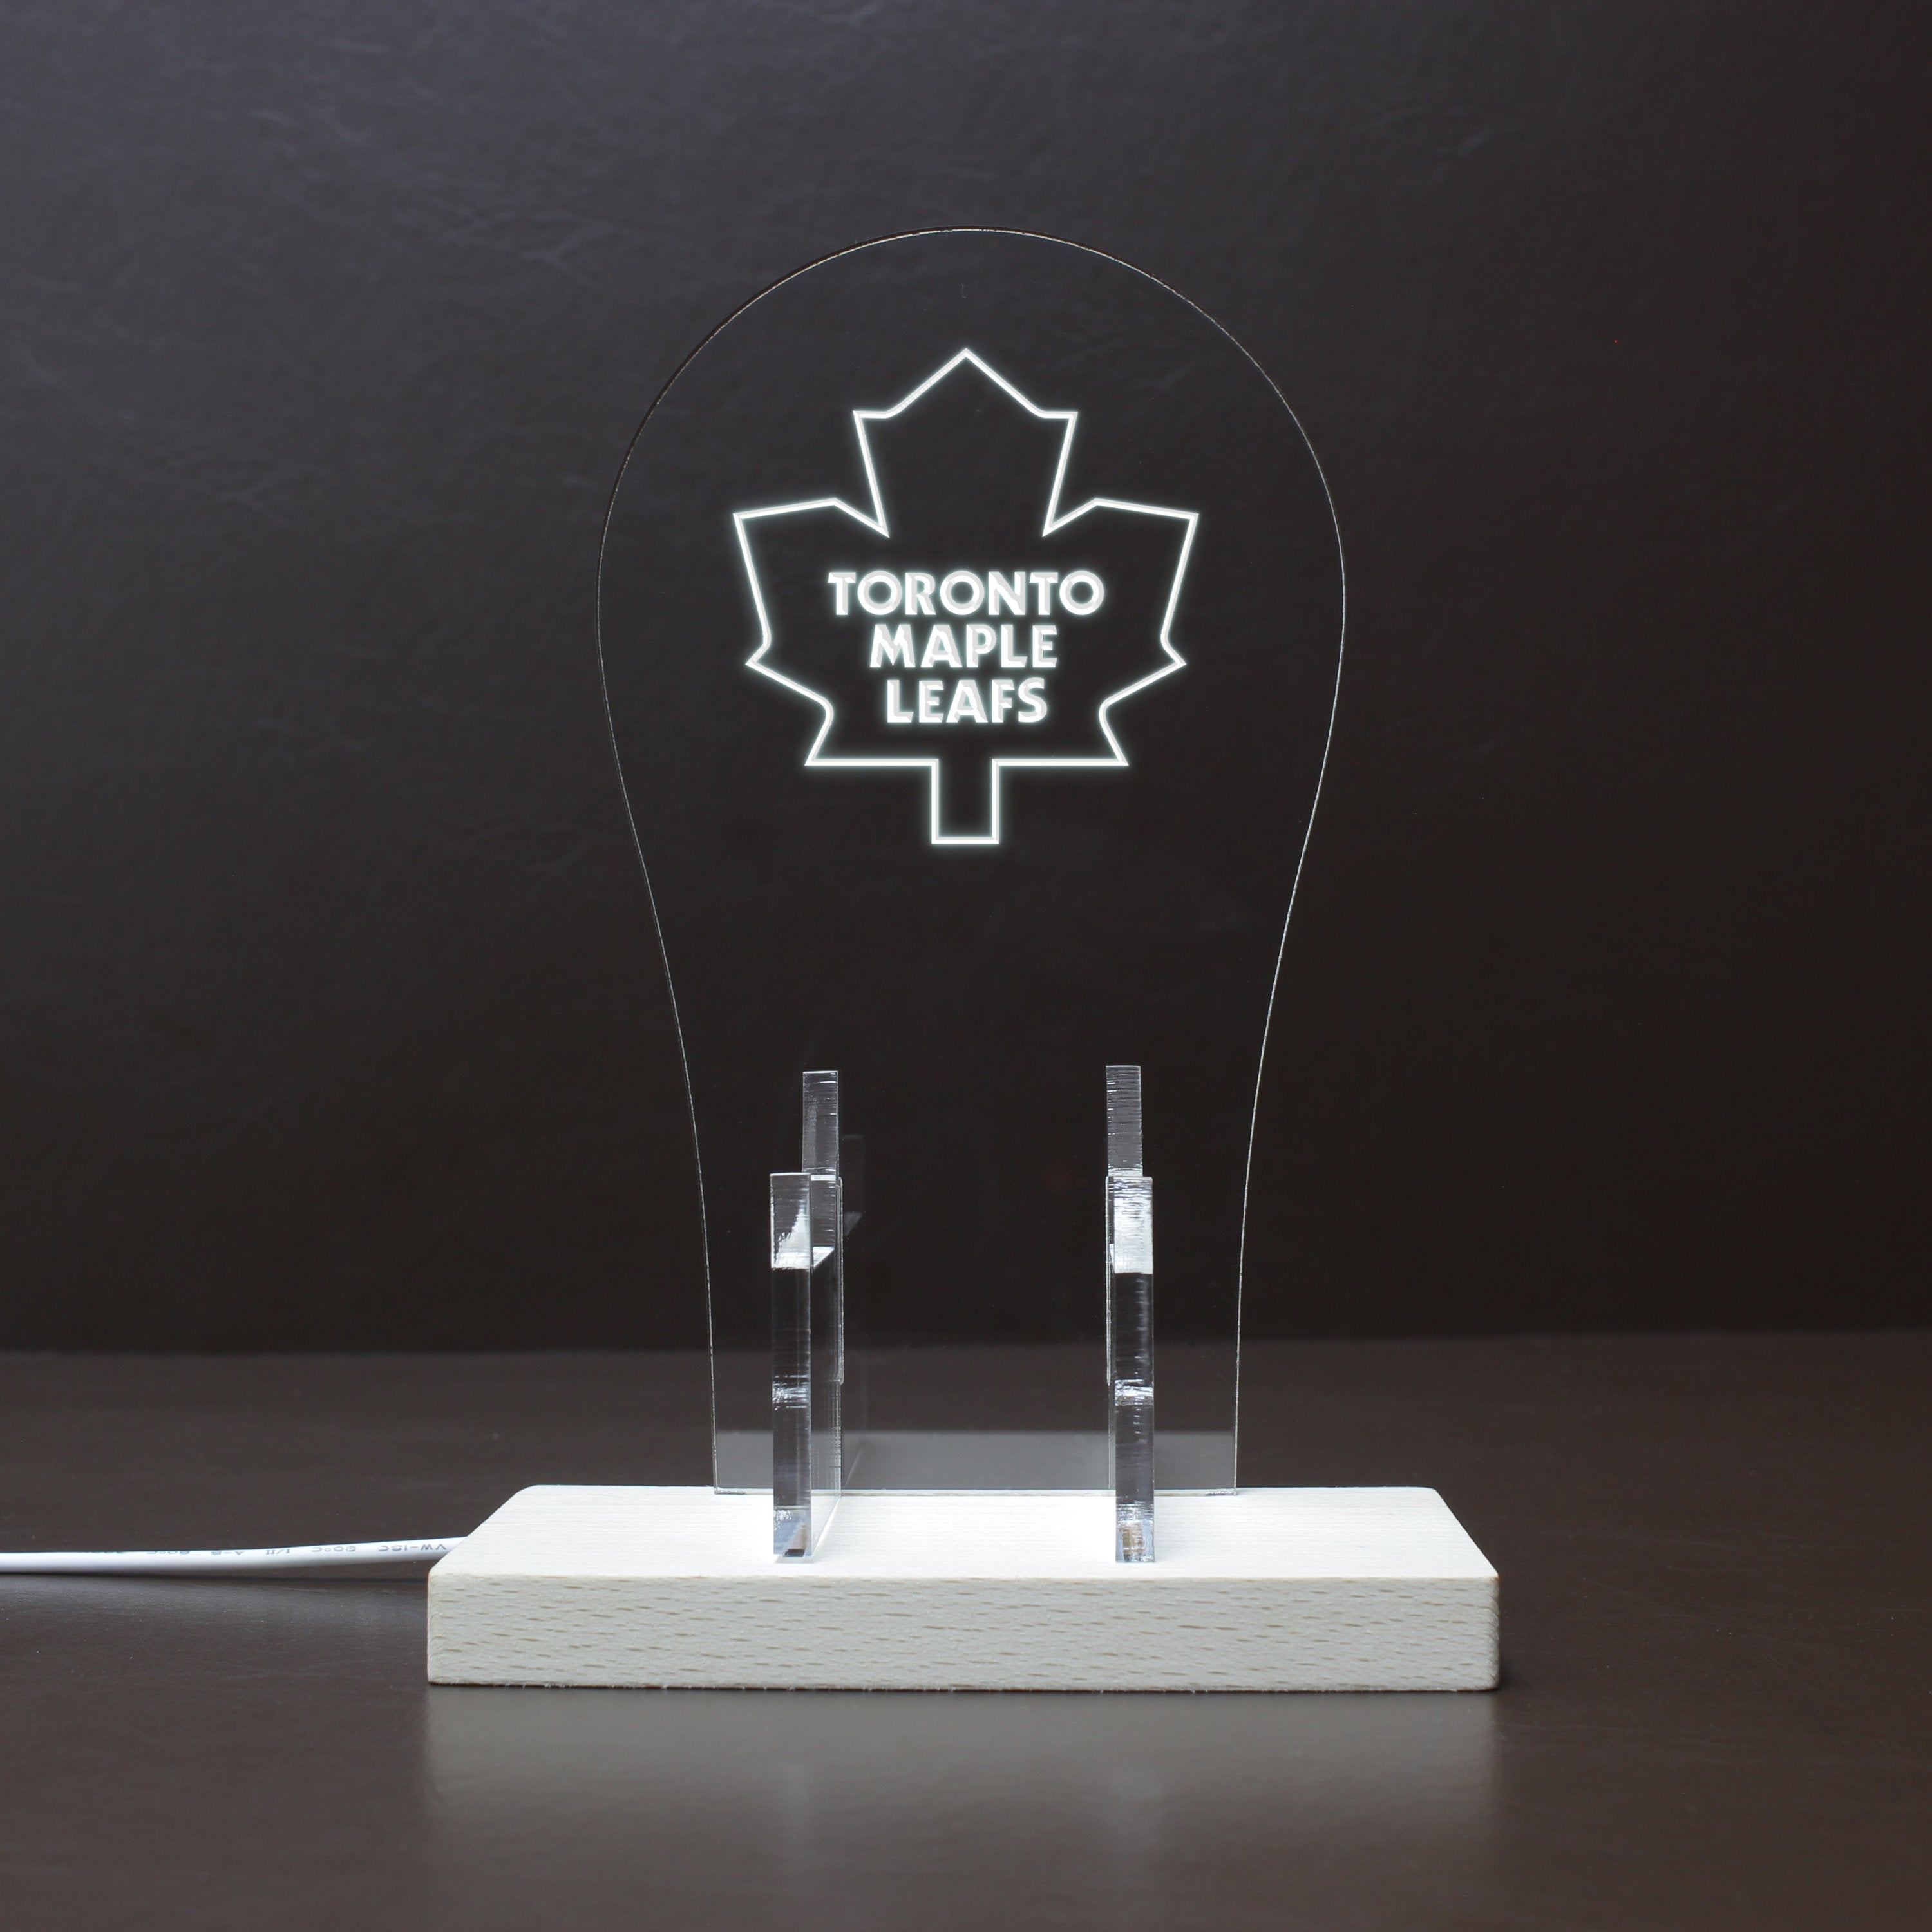 Toronto Maple Leafs LED Gaming Headset Controller Stand